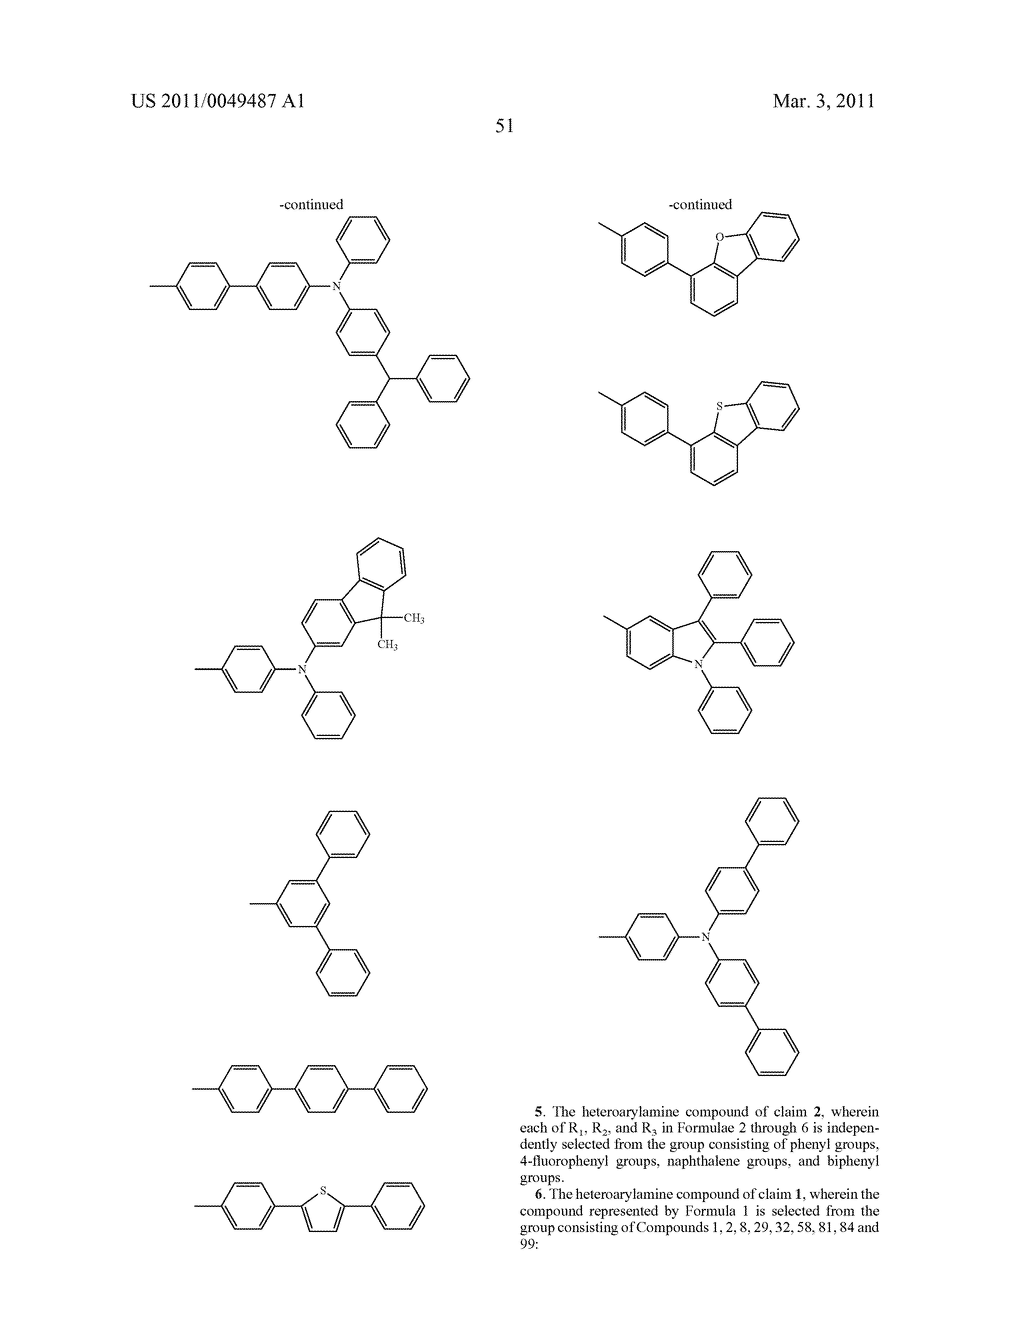 HETEROARYLAMINE COMPOUND AND ORGANIC LUMINESCENCE DEVICE USING THE SAME - diagram, schematic, and image 53